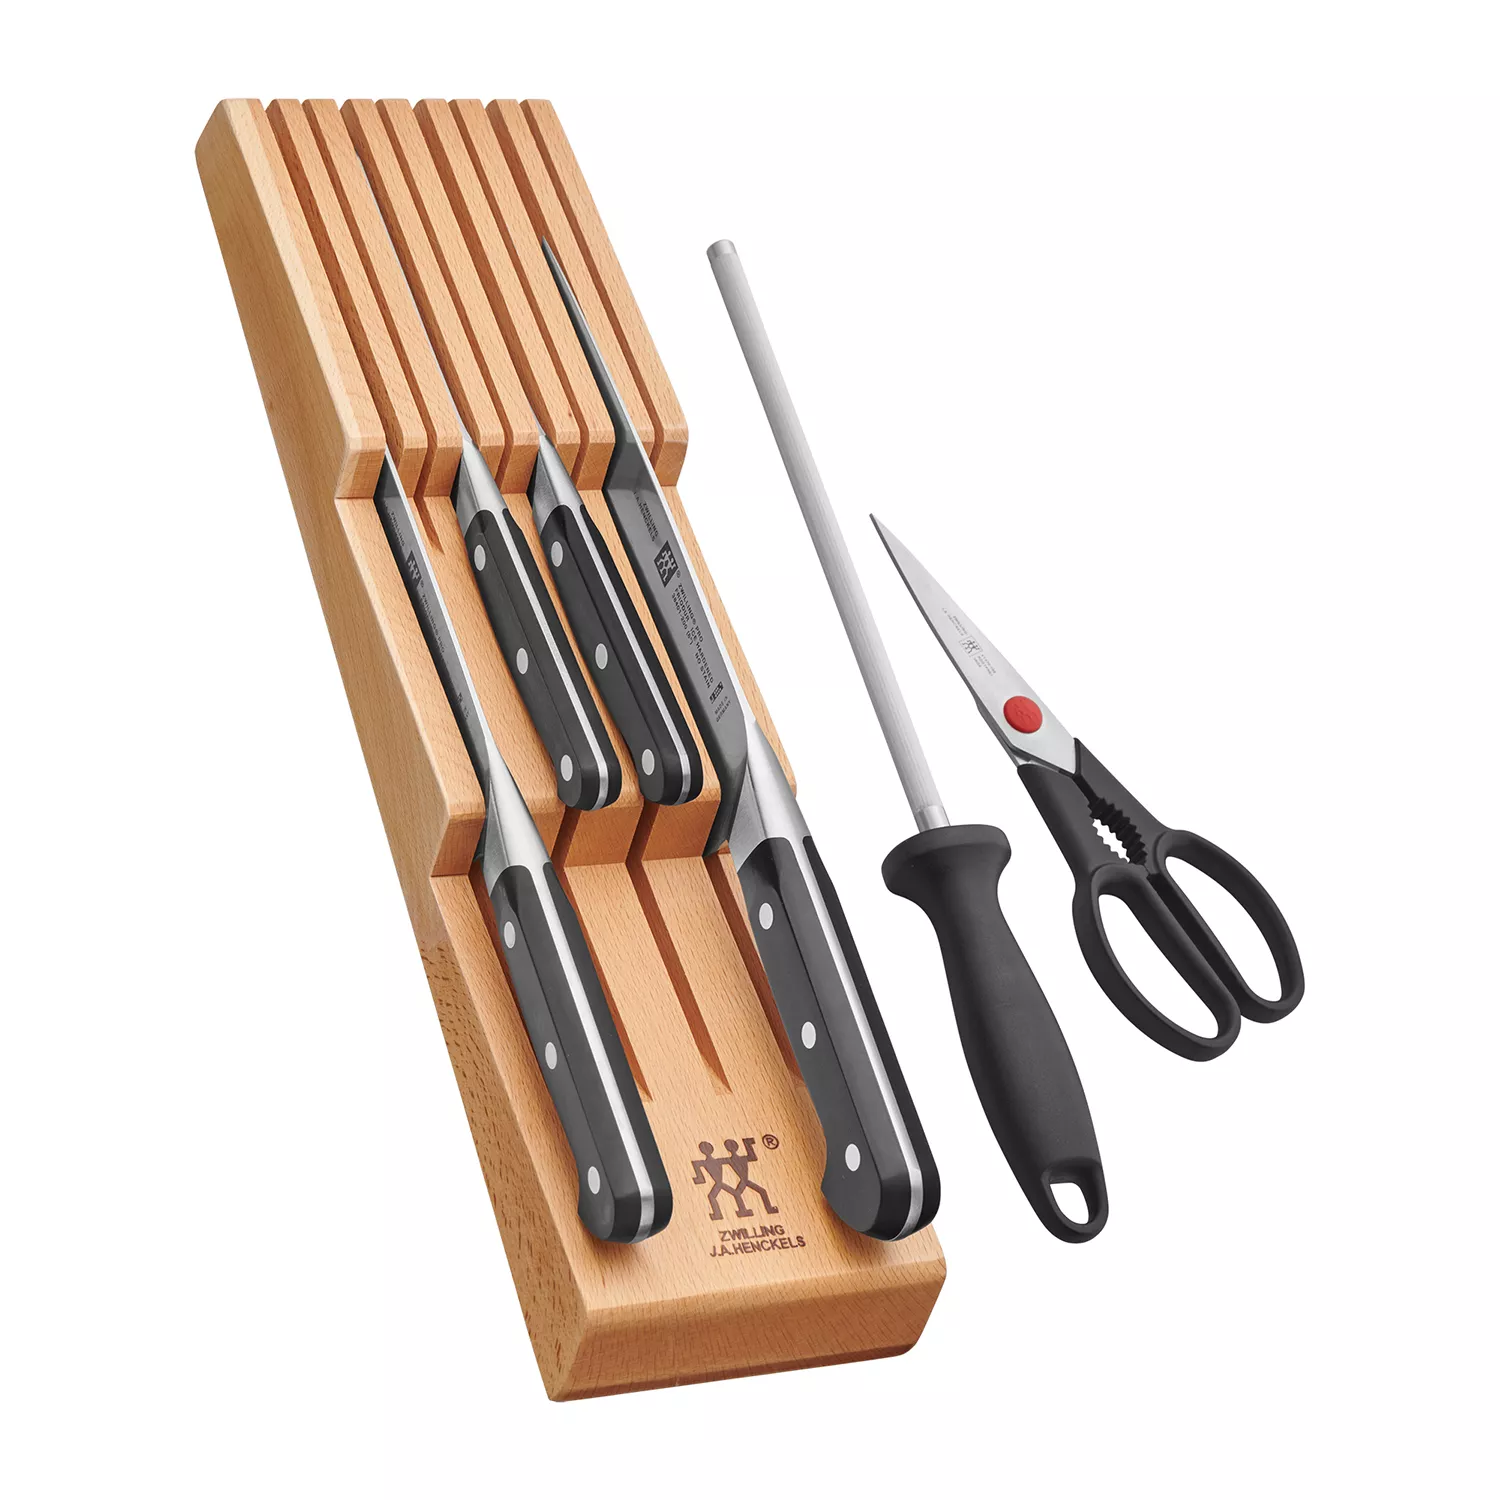 Zwilling ZWILLING TWIN Signature Self-Sharpening Knife Block Set - Brown -  8 requests